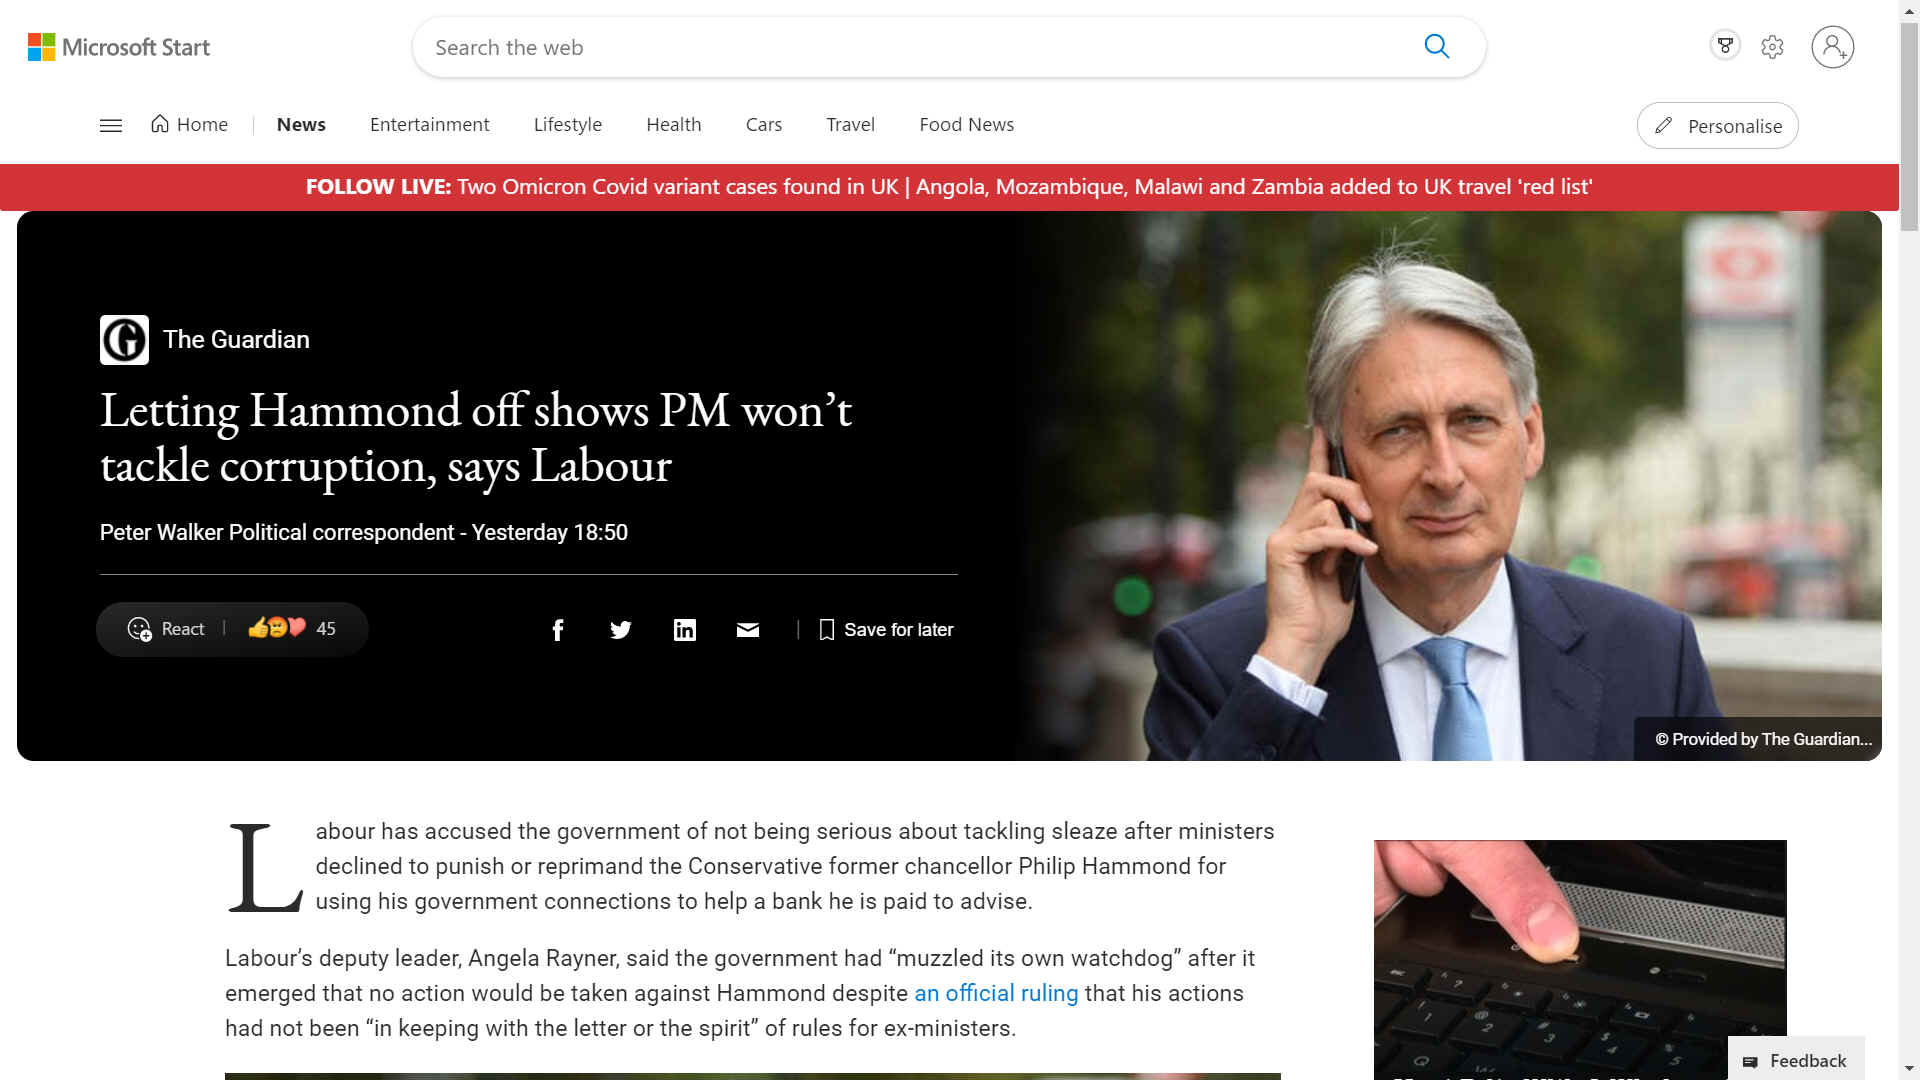 State grants immunity to former minister fraudster Philip Hammond, Section 3 and 4 2006 Act